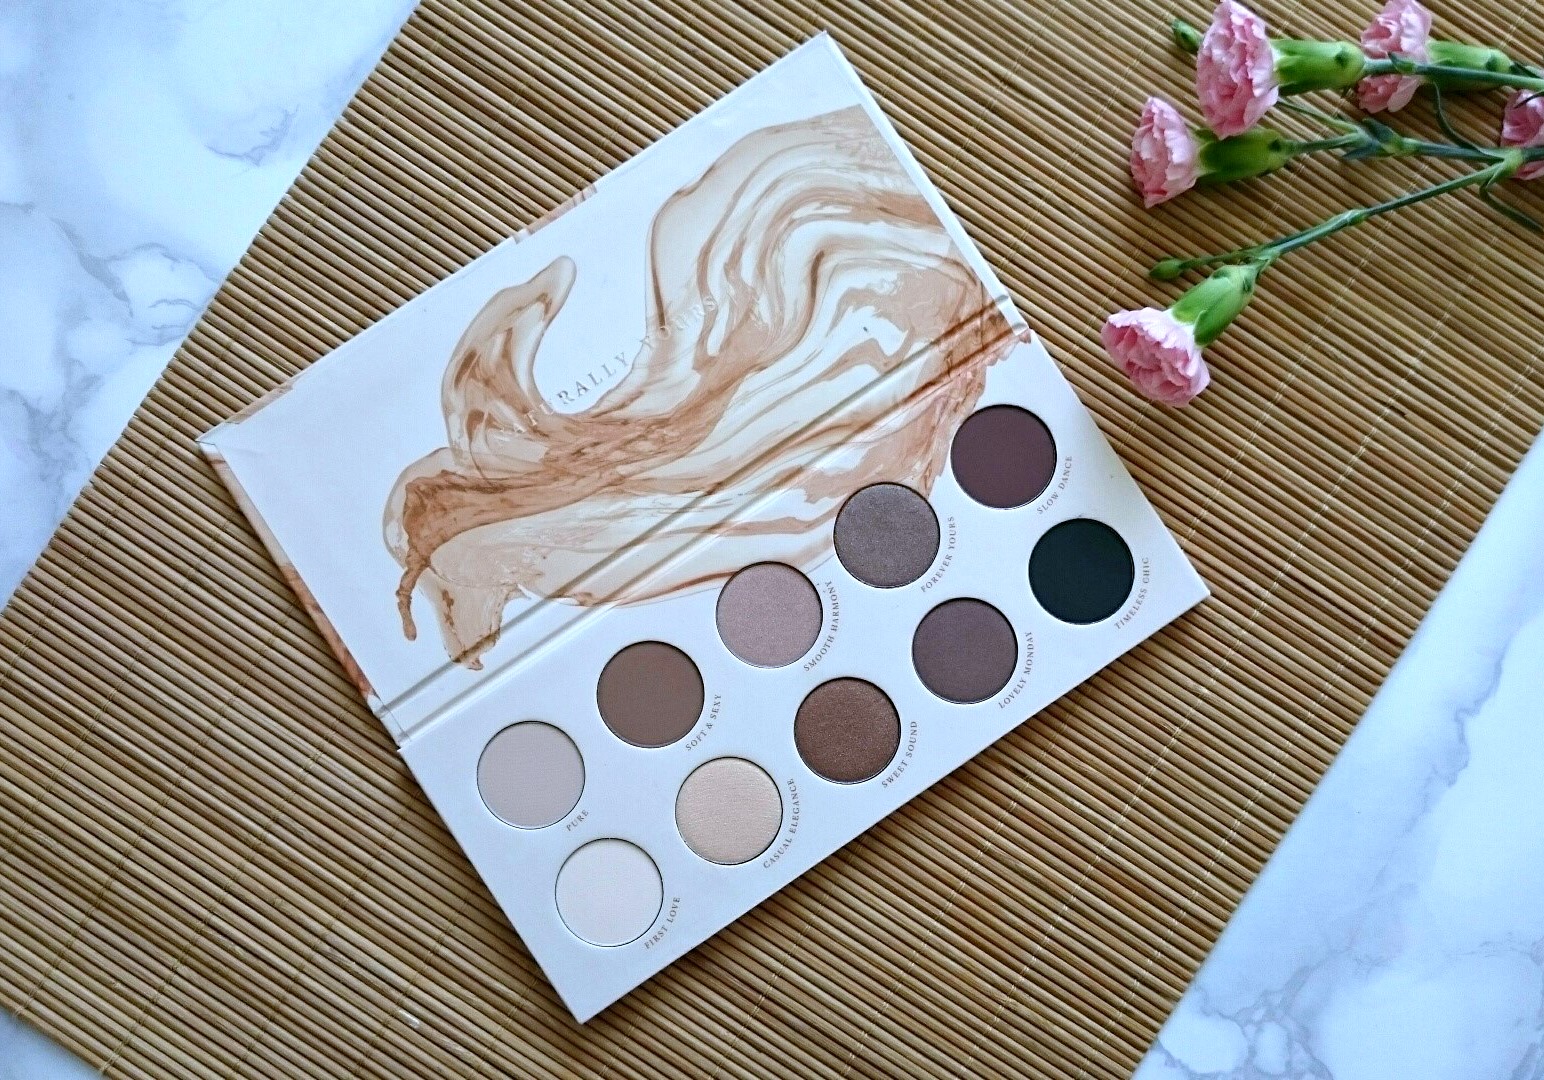 Zoeva Naturally Yours palette